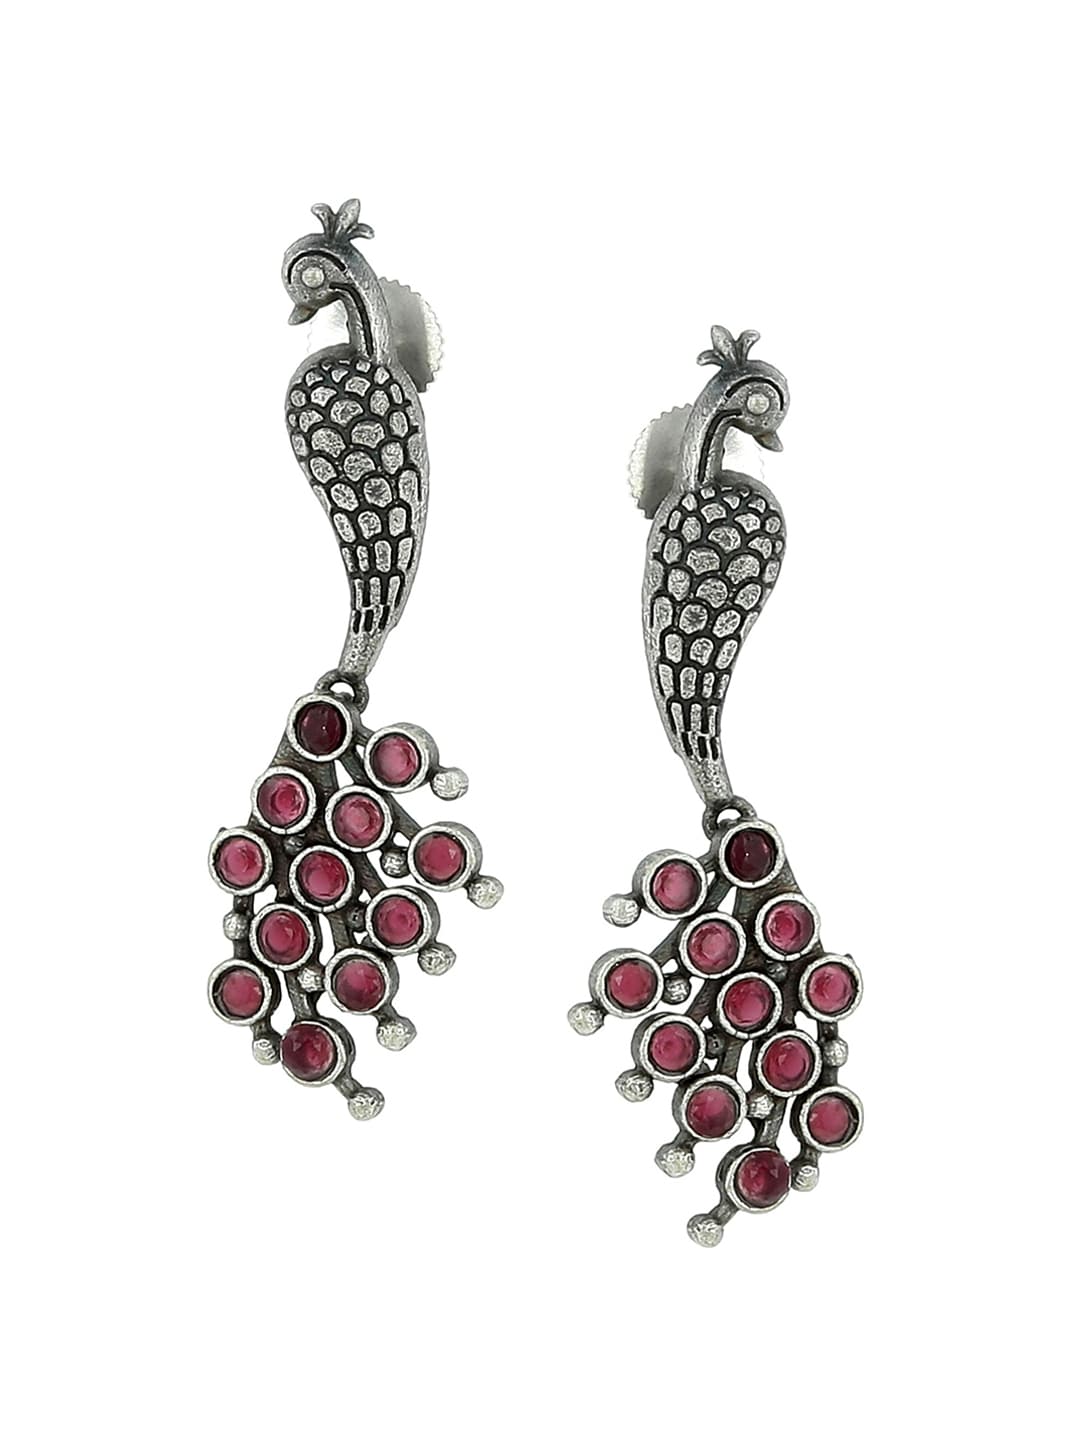 EL REGALO Silver & Red Peacock Shaped Oxidised Drop Earrings - for Women and Girls
Style ID: 16991460